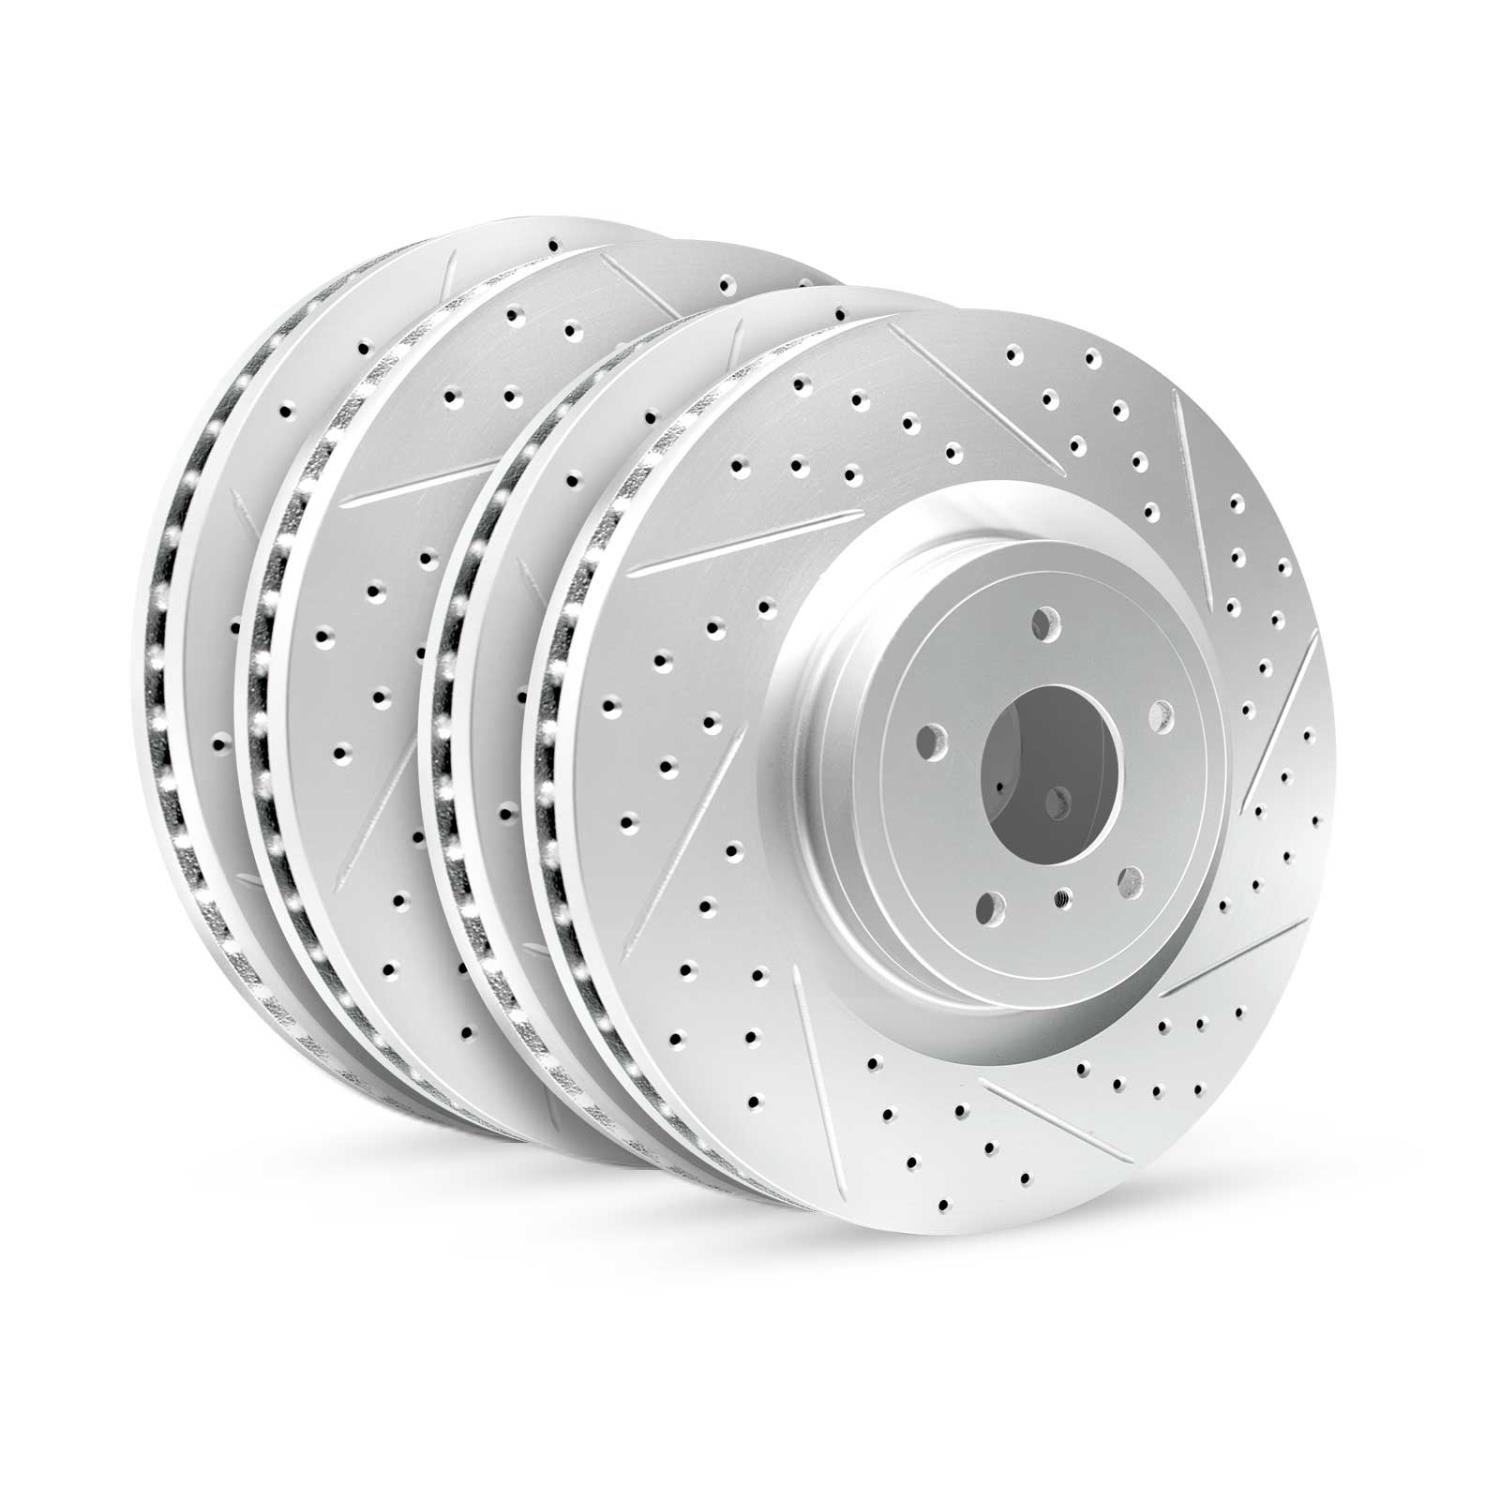 GEO-Carbon Drilled/Slotted Rotors, 2005-2008 Infiniti/Nissan, Position: Front/Rear